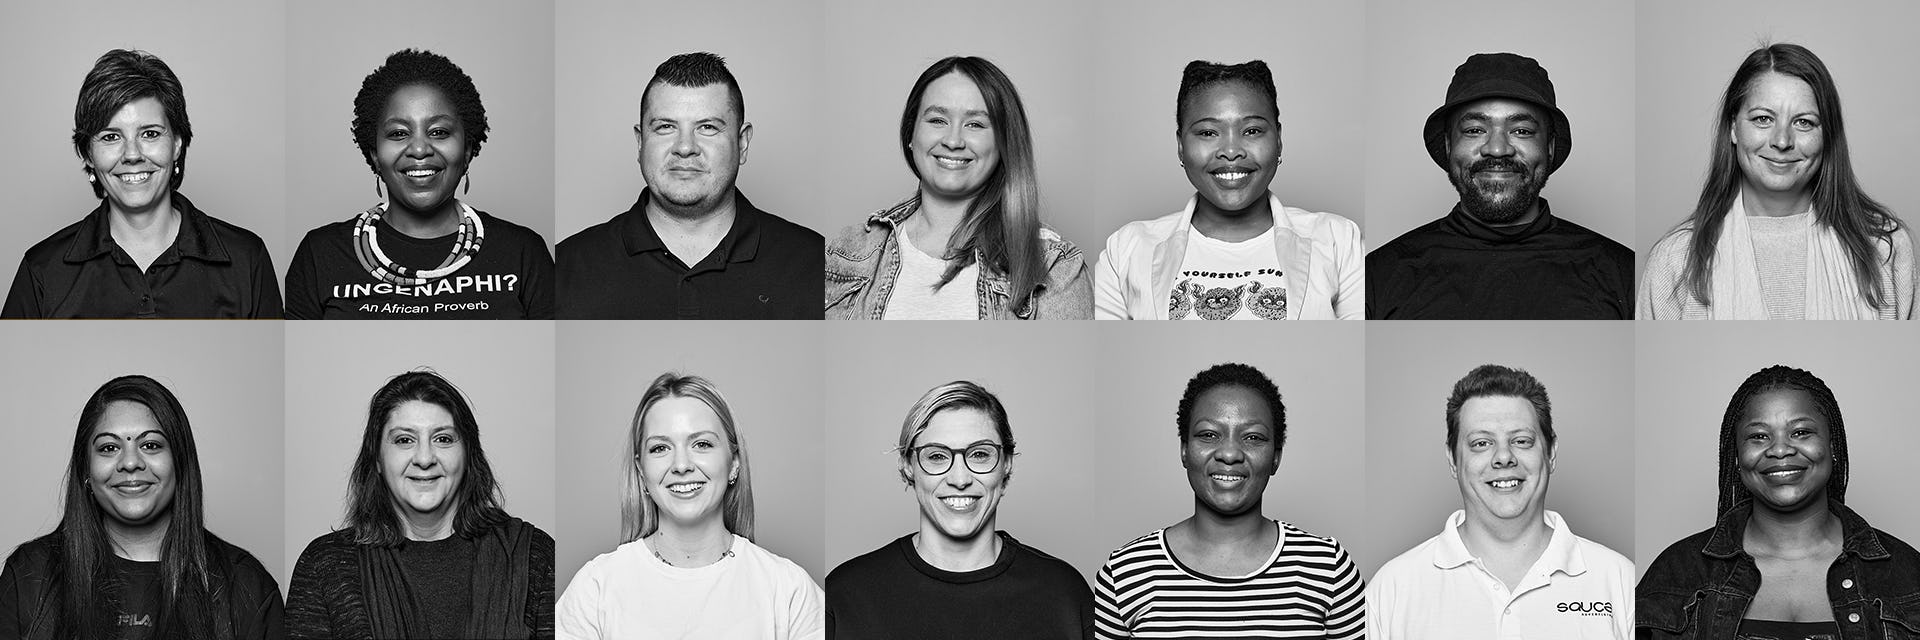 Portraits of Sauce Advertising employees